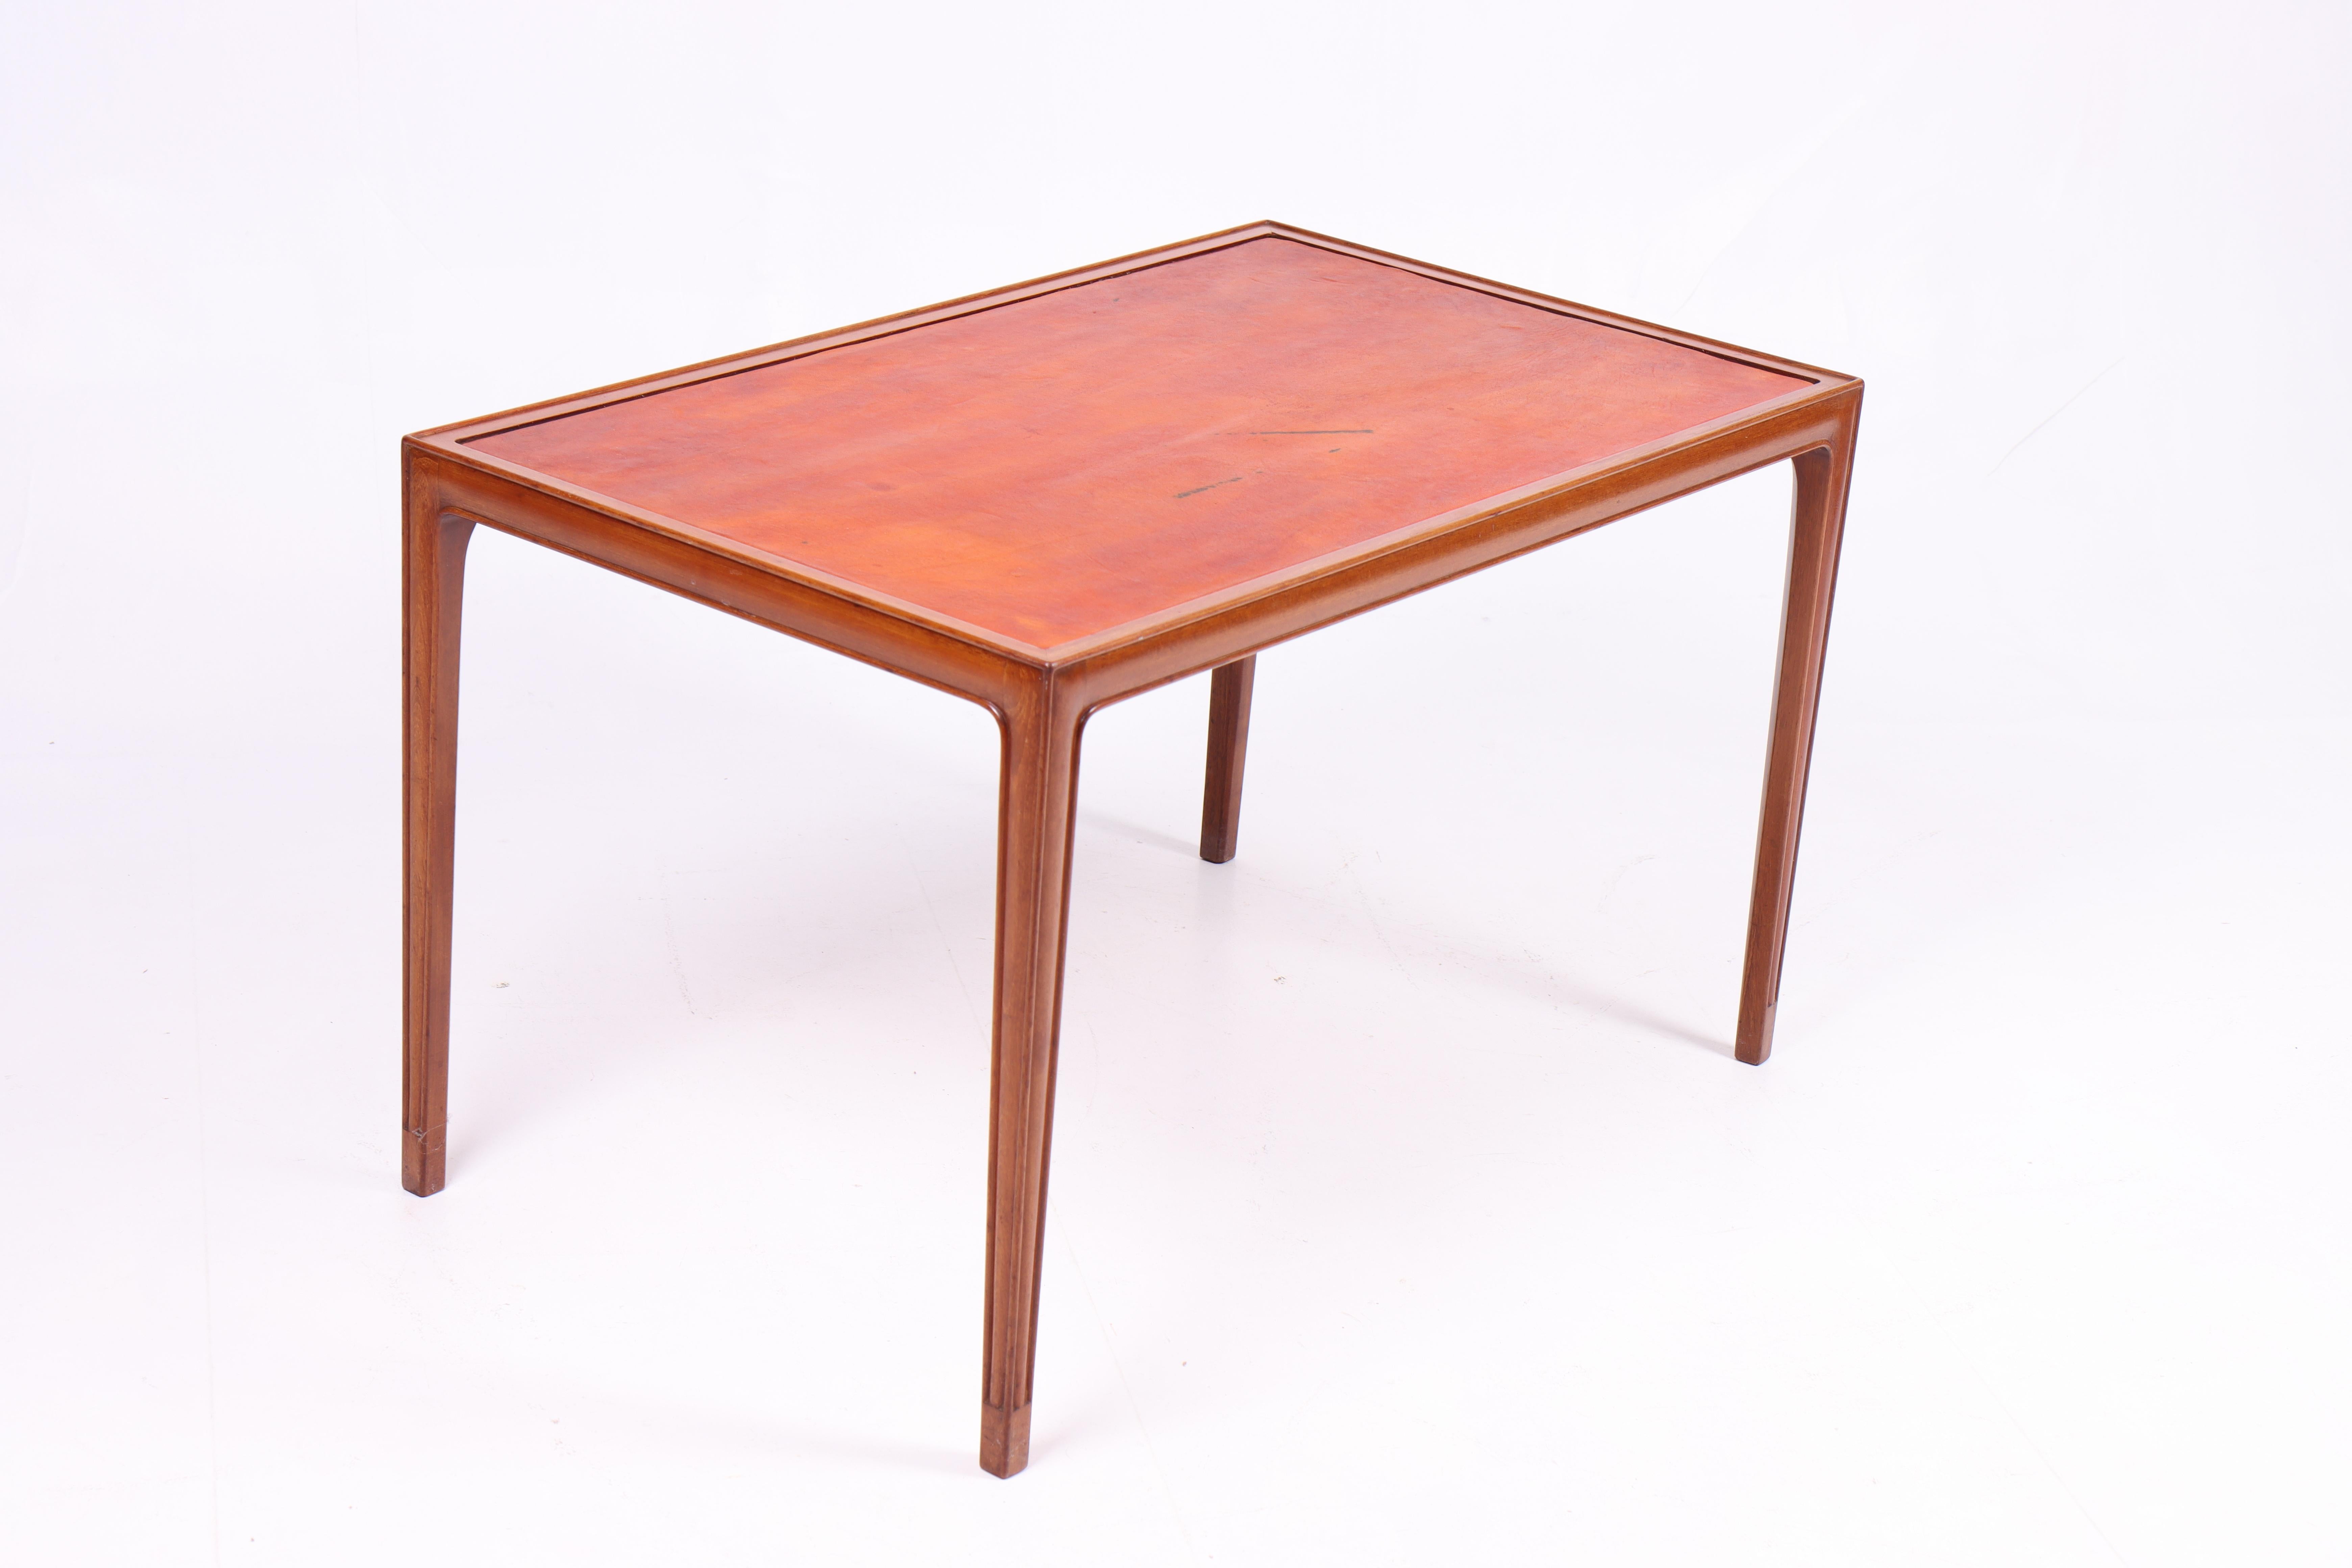 Scandinavian Modern Low Table in Mahogany and Patinated Leather, Danish Cabinetmaker 1950s For Sale